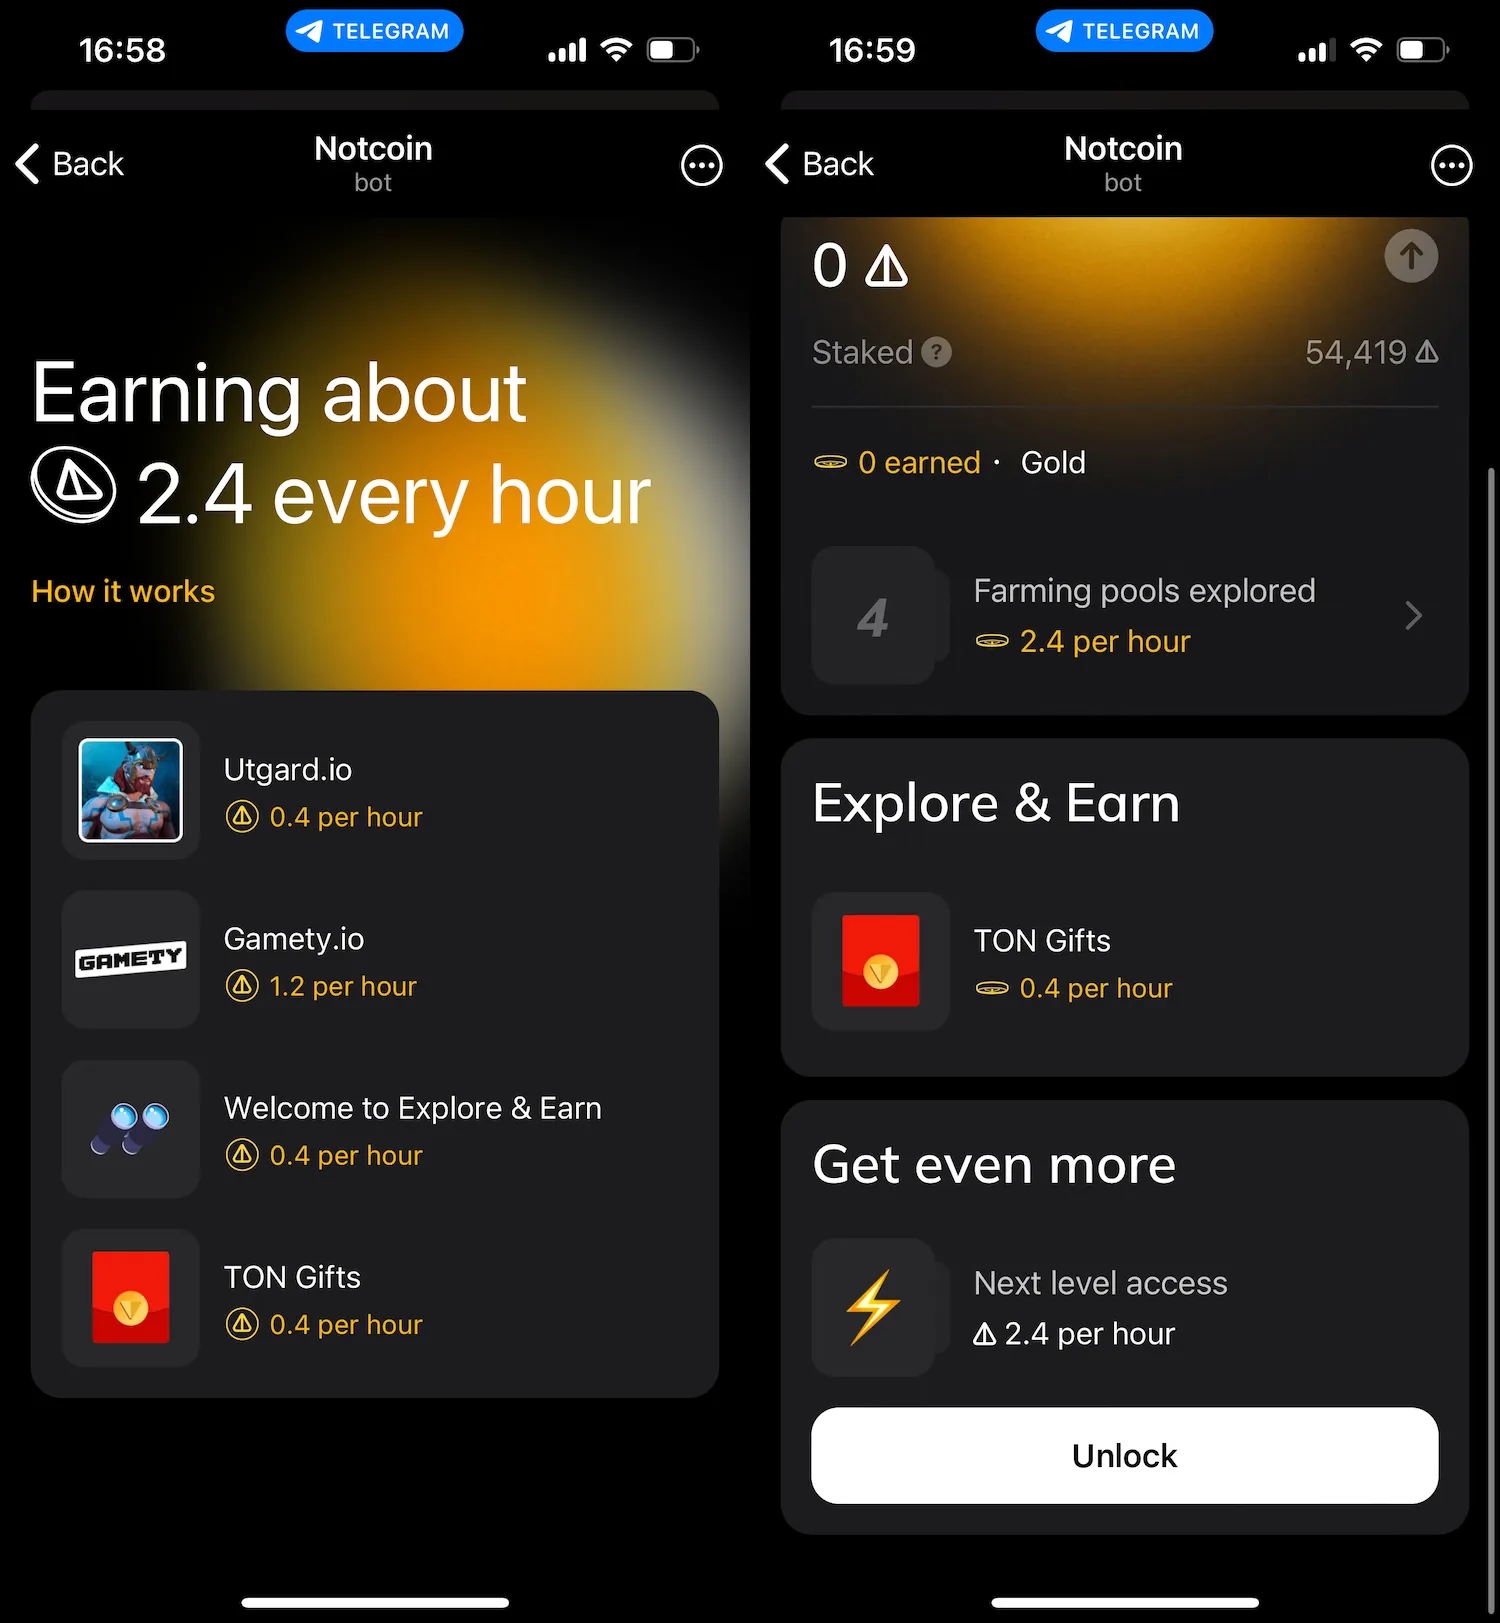 Sample screenshots from Notcoin's earning missions